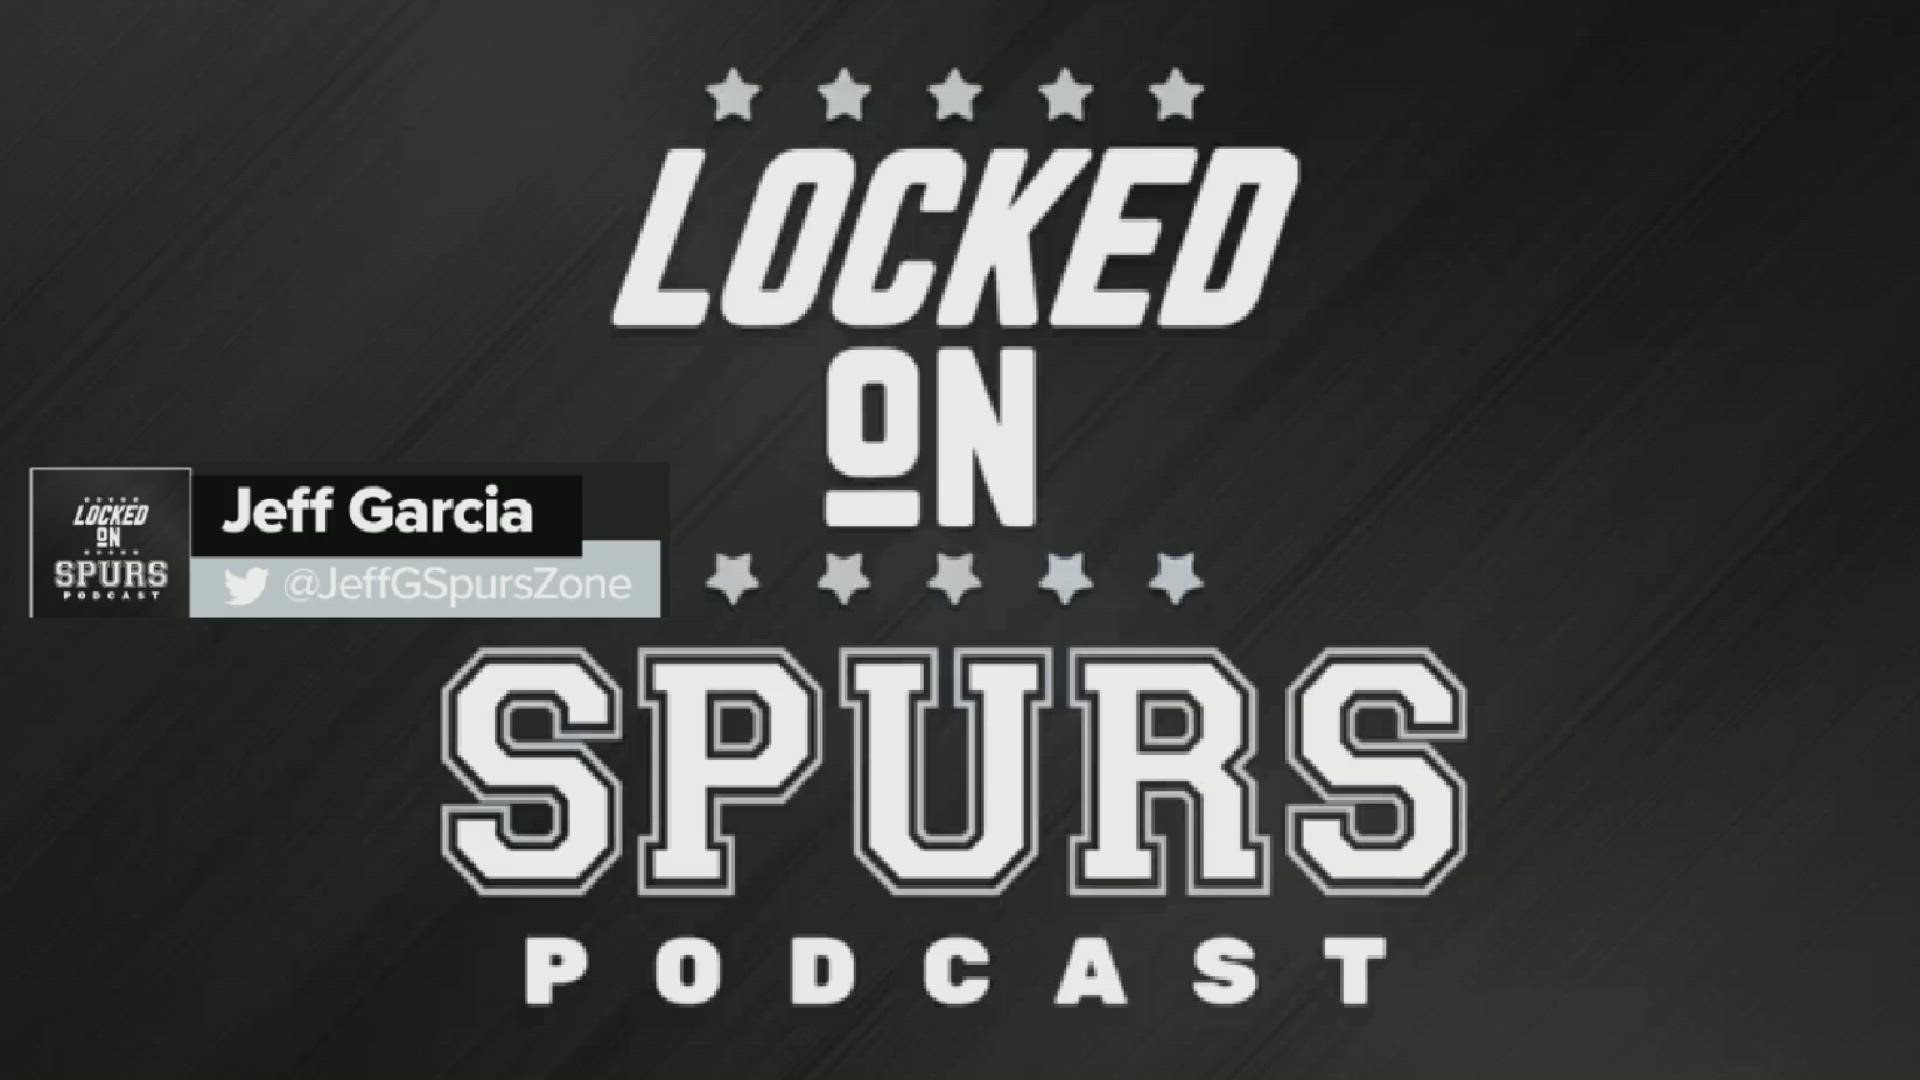 What is in store for the Spurs next season?